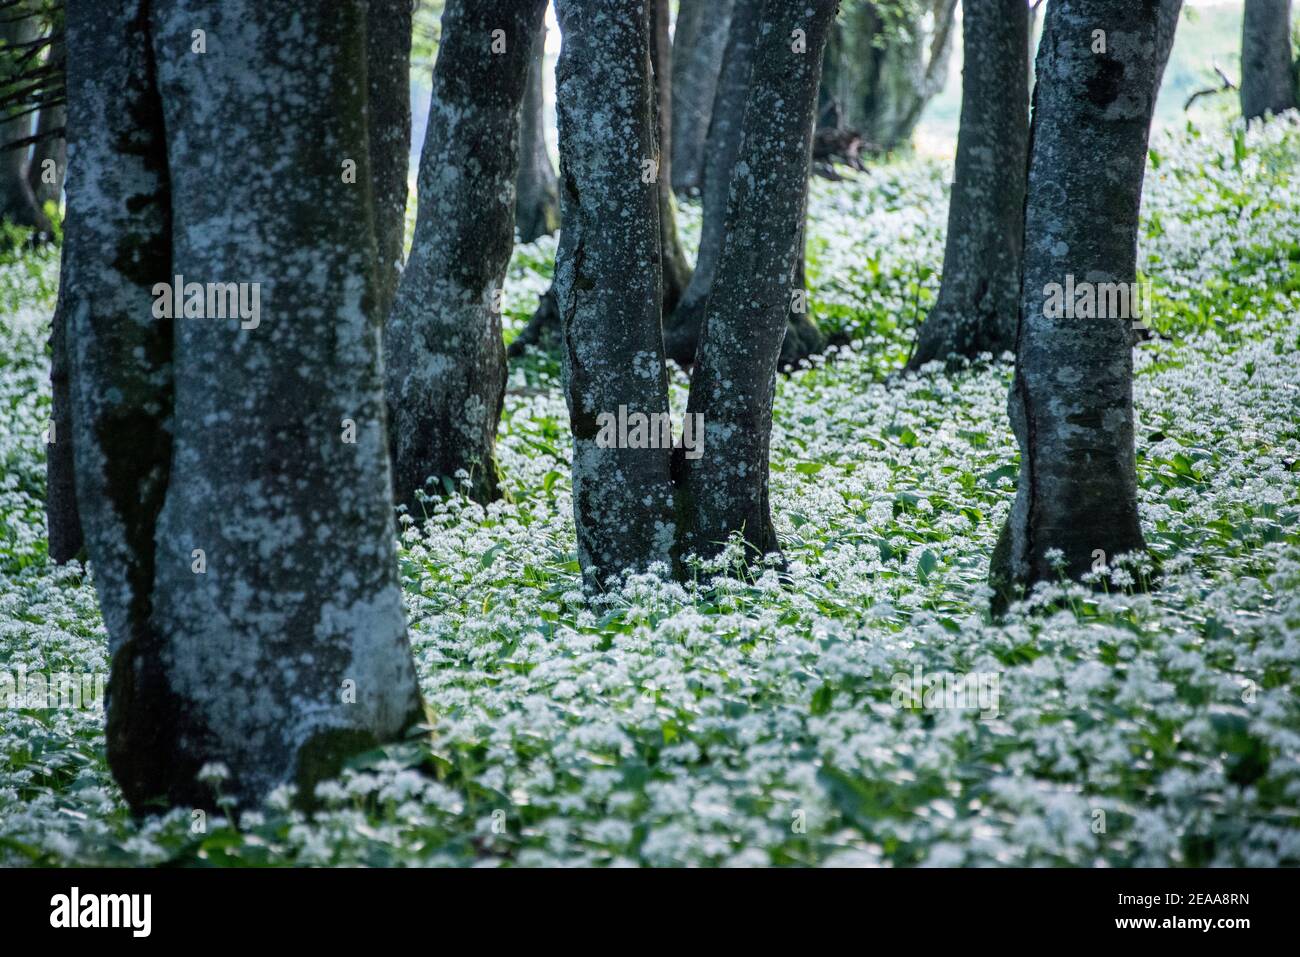 Beech tree trunks with white wild garlic blossoms Stock Photo